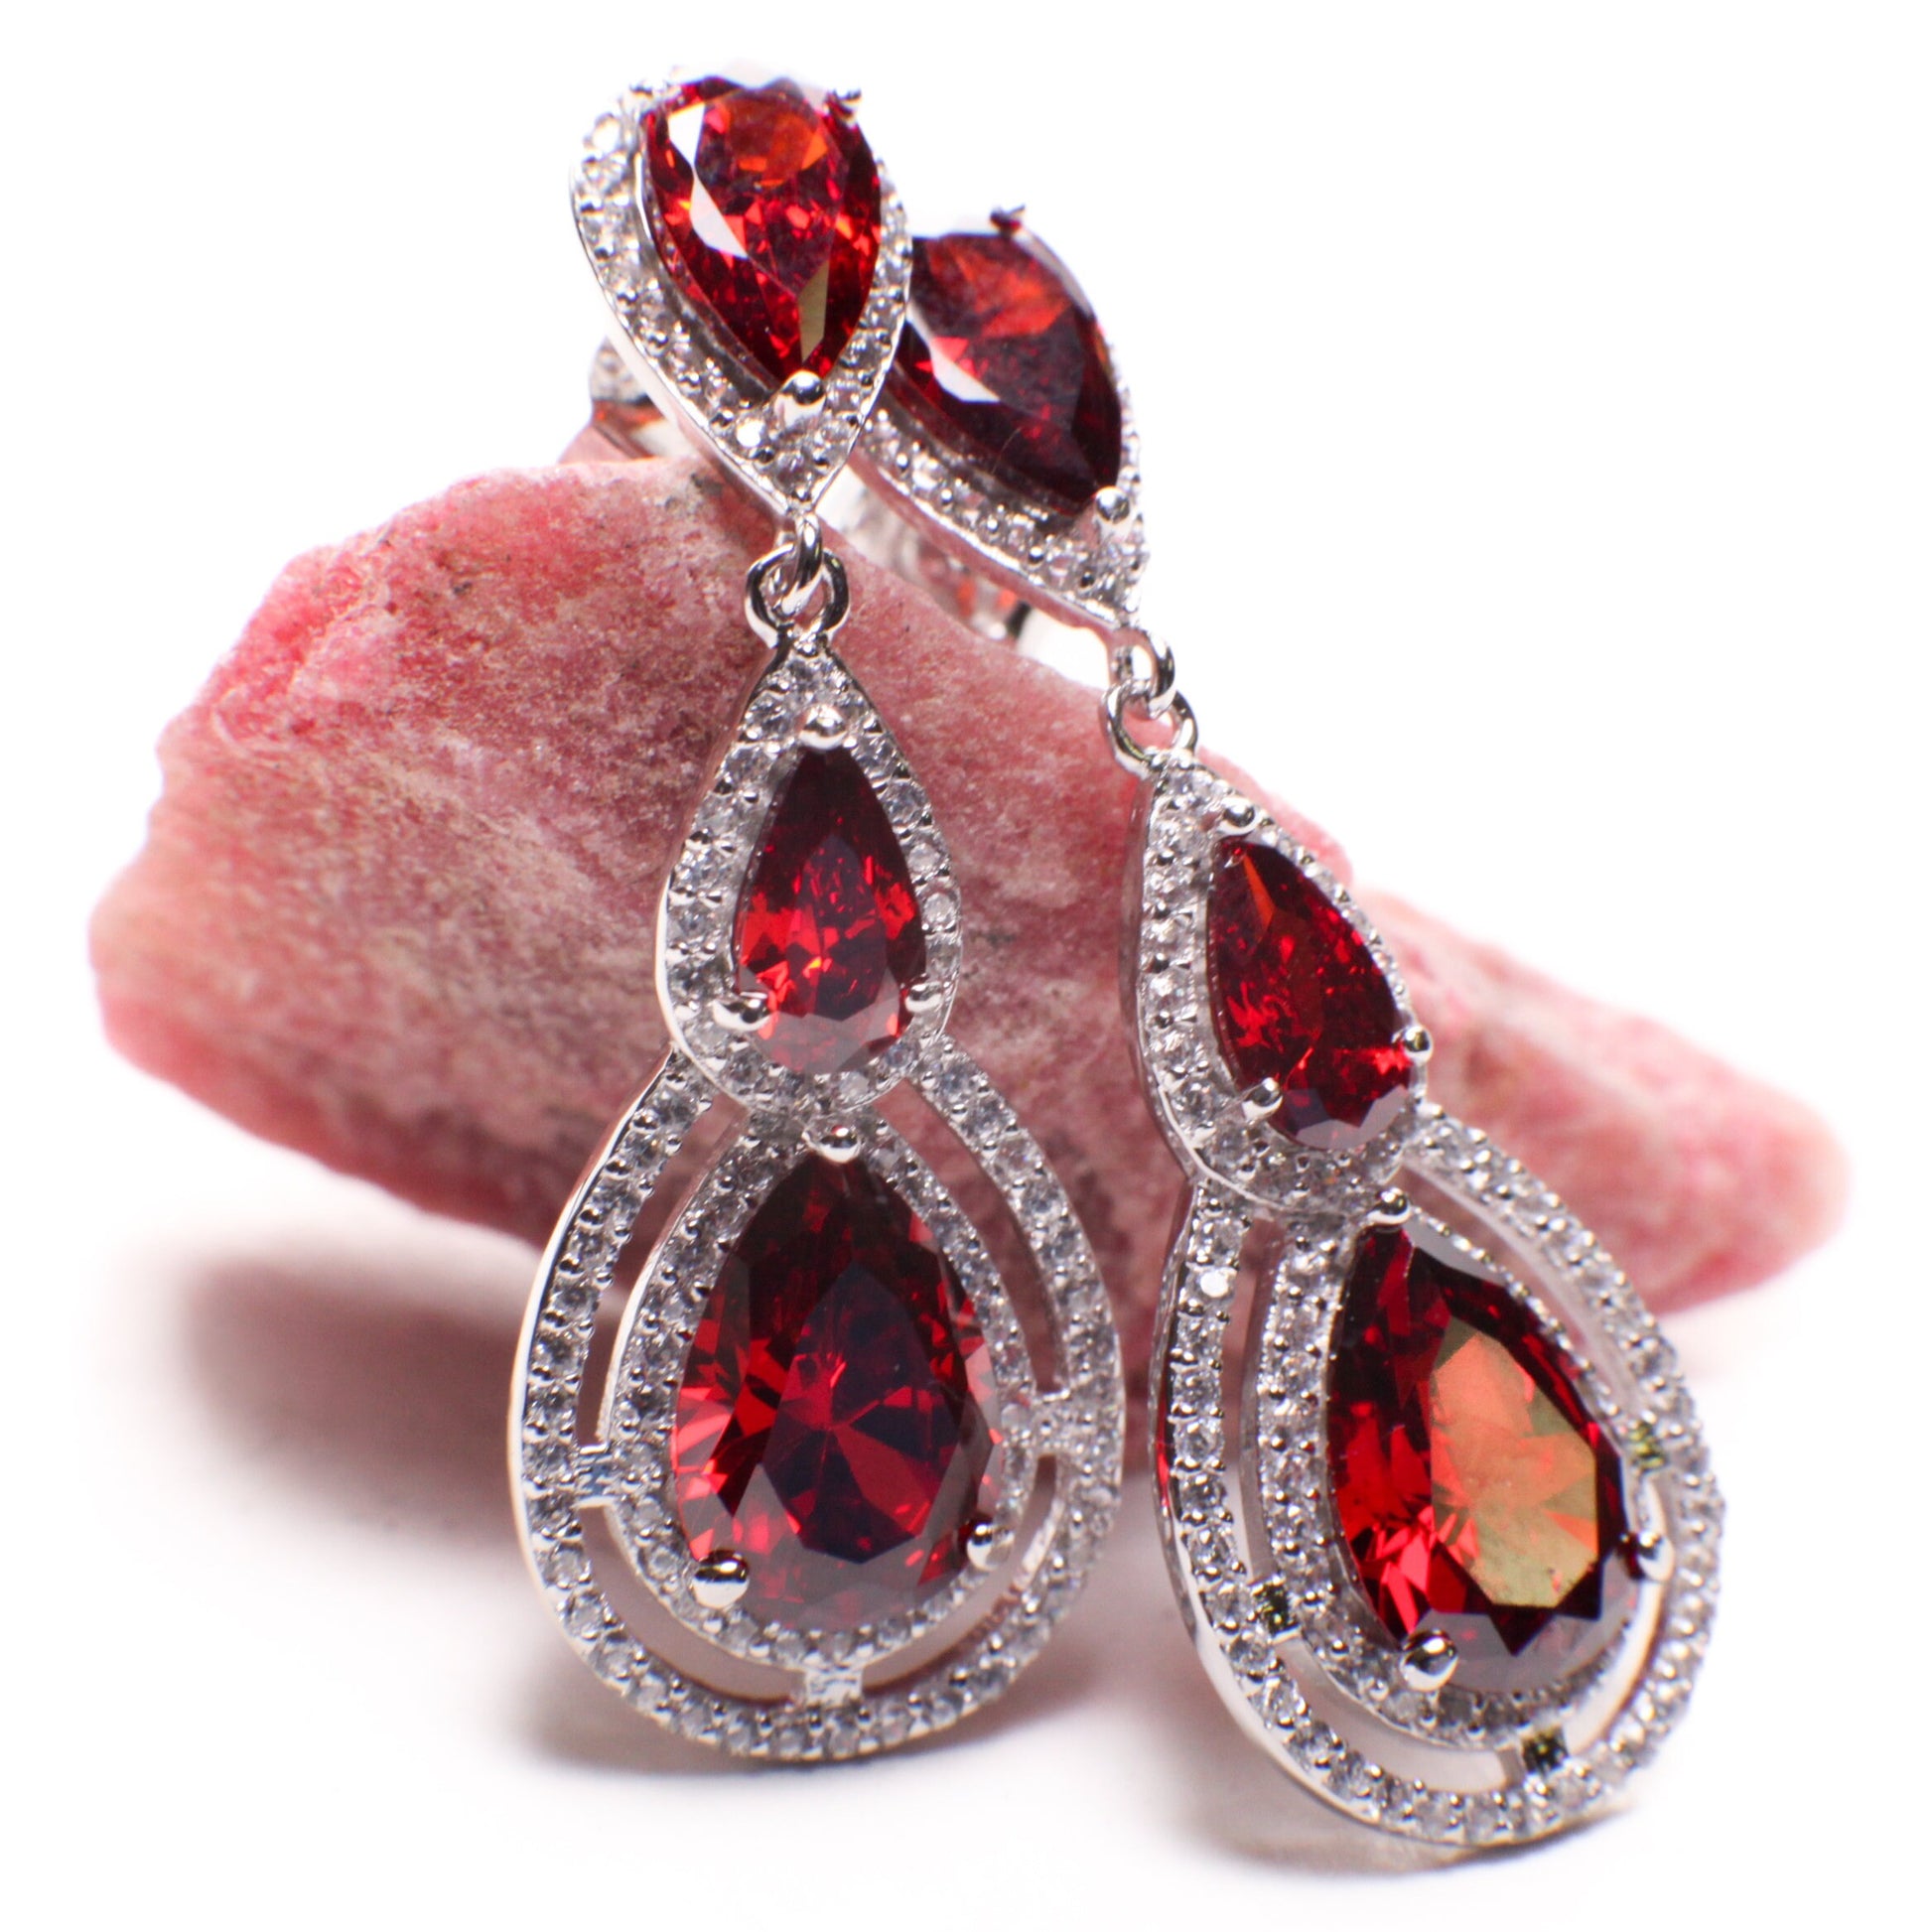 925 Sterling Silver Mozambique Garnet Teadrop 14x37mm dangling on Cubic Zirconia Teardrop Earrings, 925 stamped, gift for her